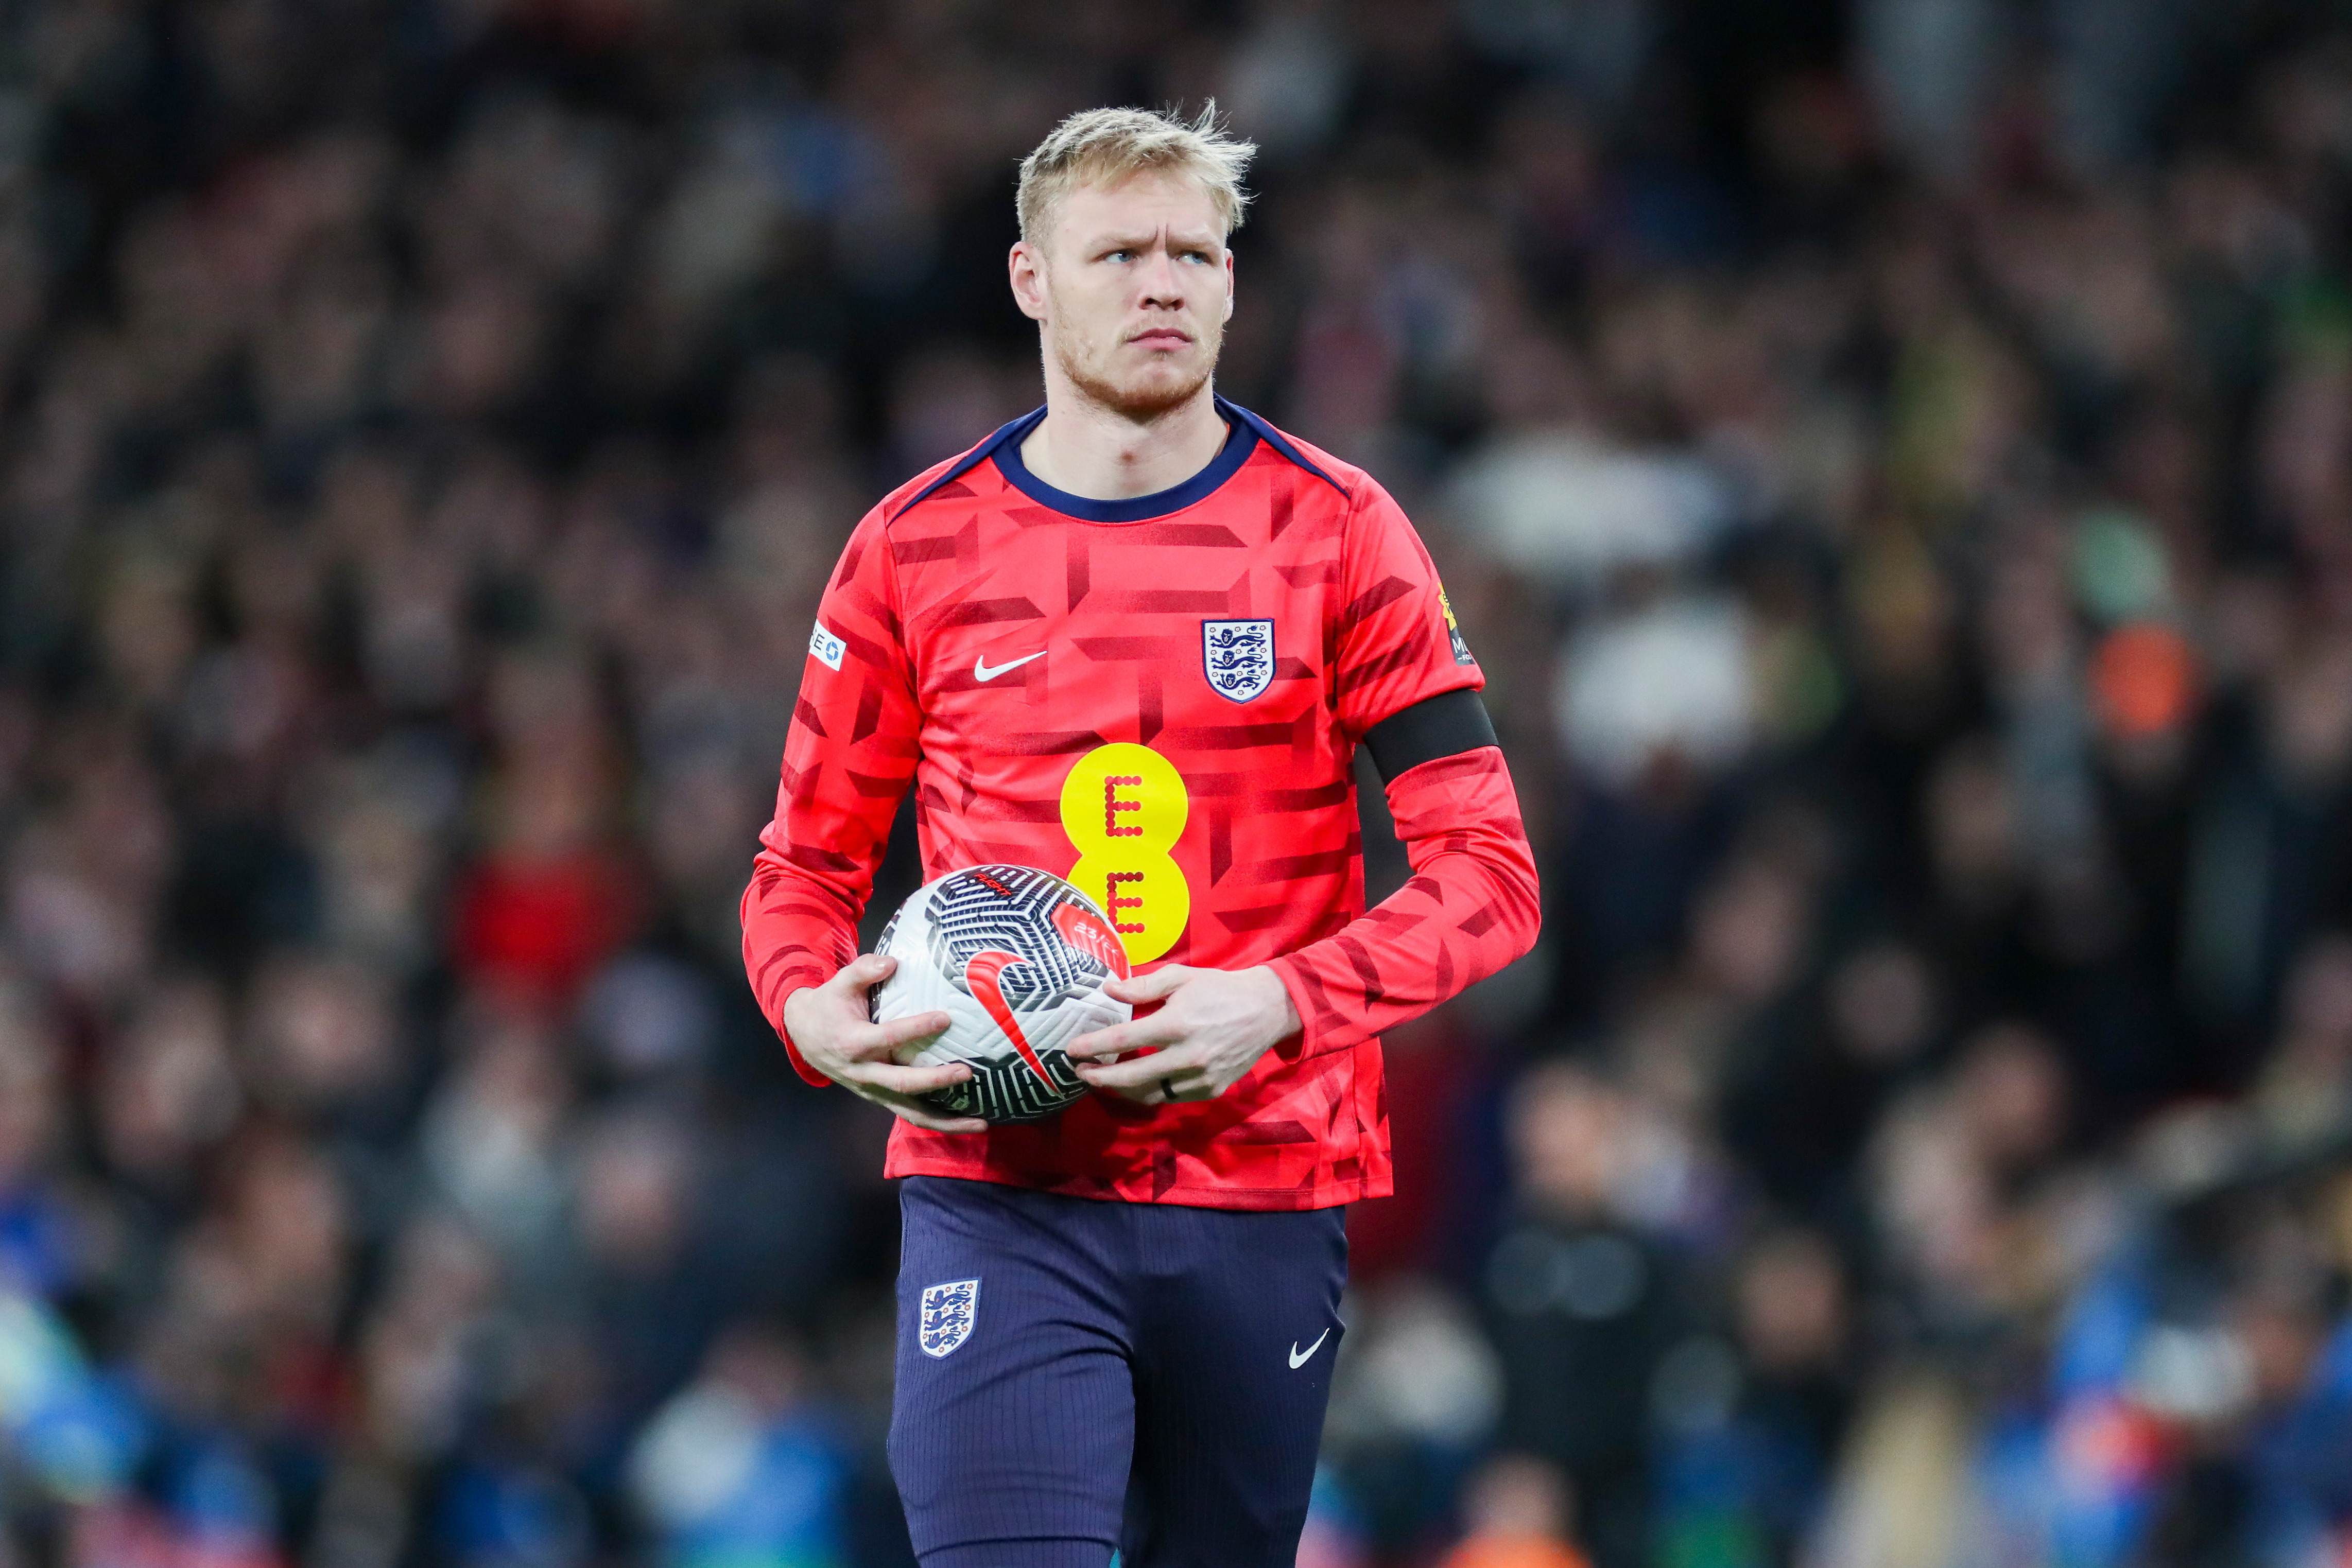 Arsenal back-up goalkeeper Aaron Ramsdale also is a stand-in for England